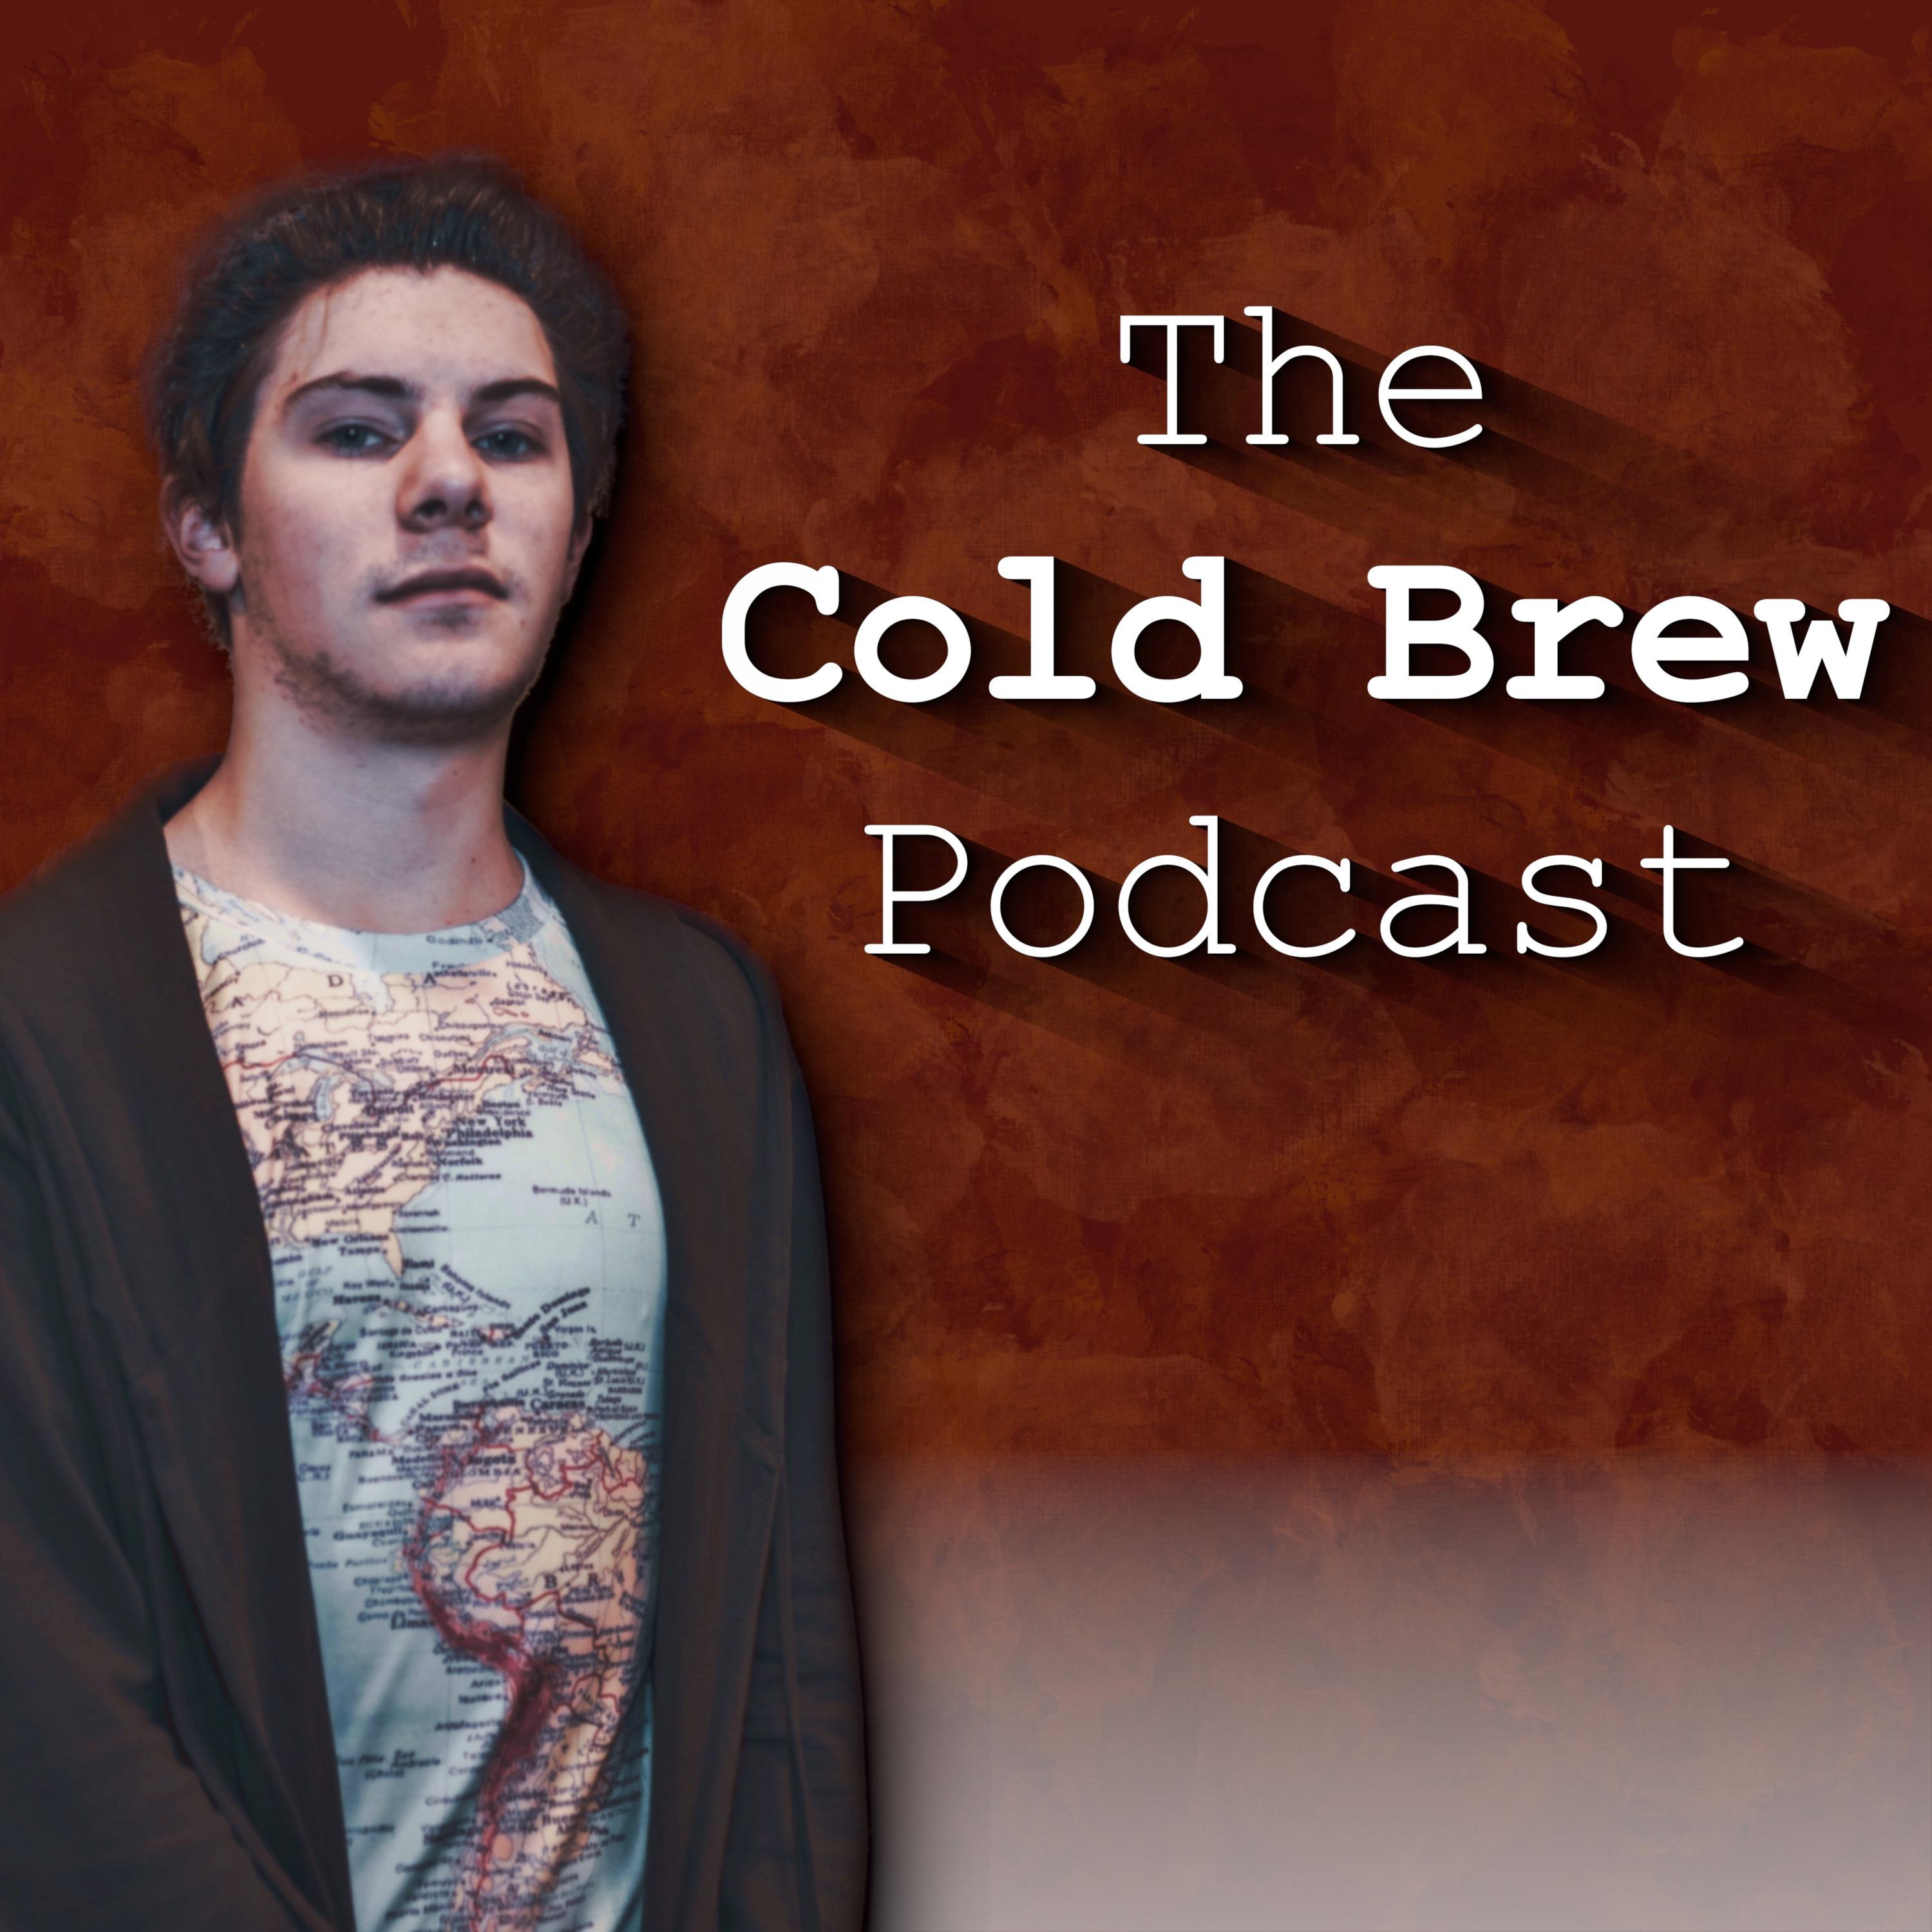 The Cold Brew Podcast